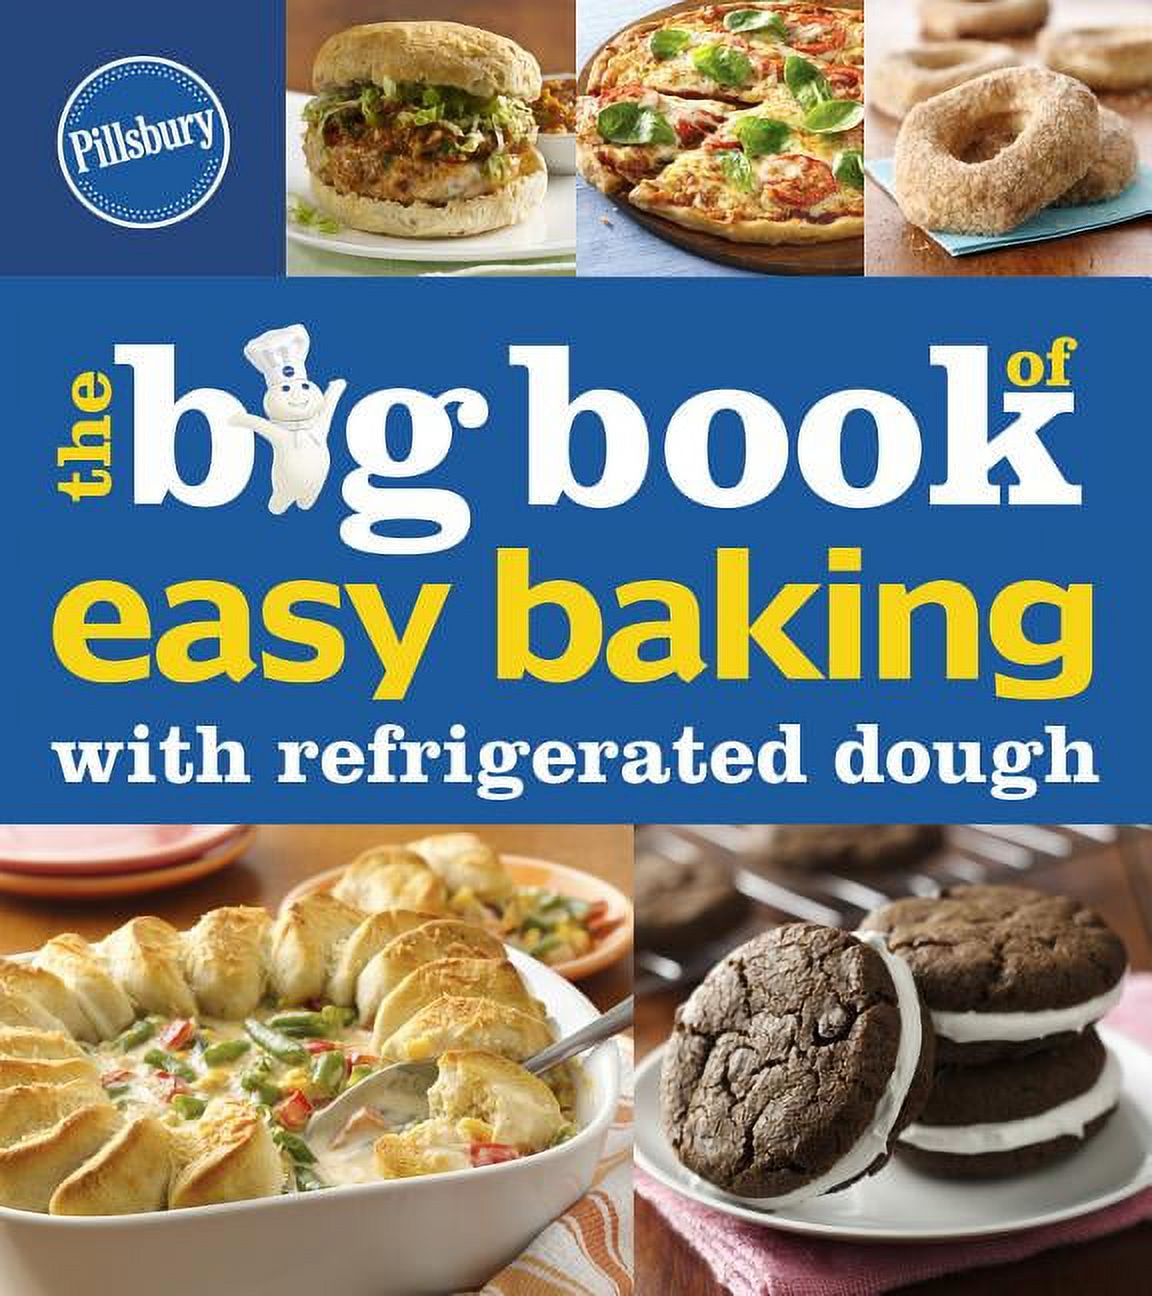 Pillsbury The Big Book Of Easy Baking With Refrigerated Dough (Betty Crocker Big Book) - image 1 of 2